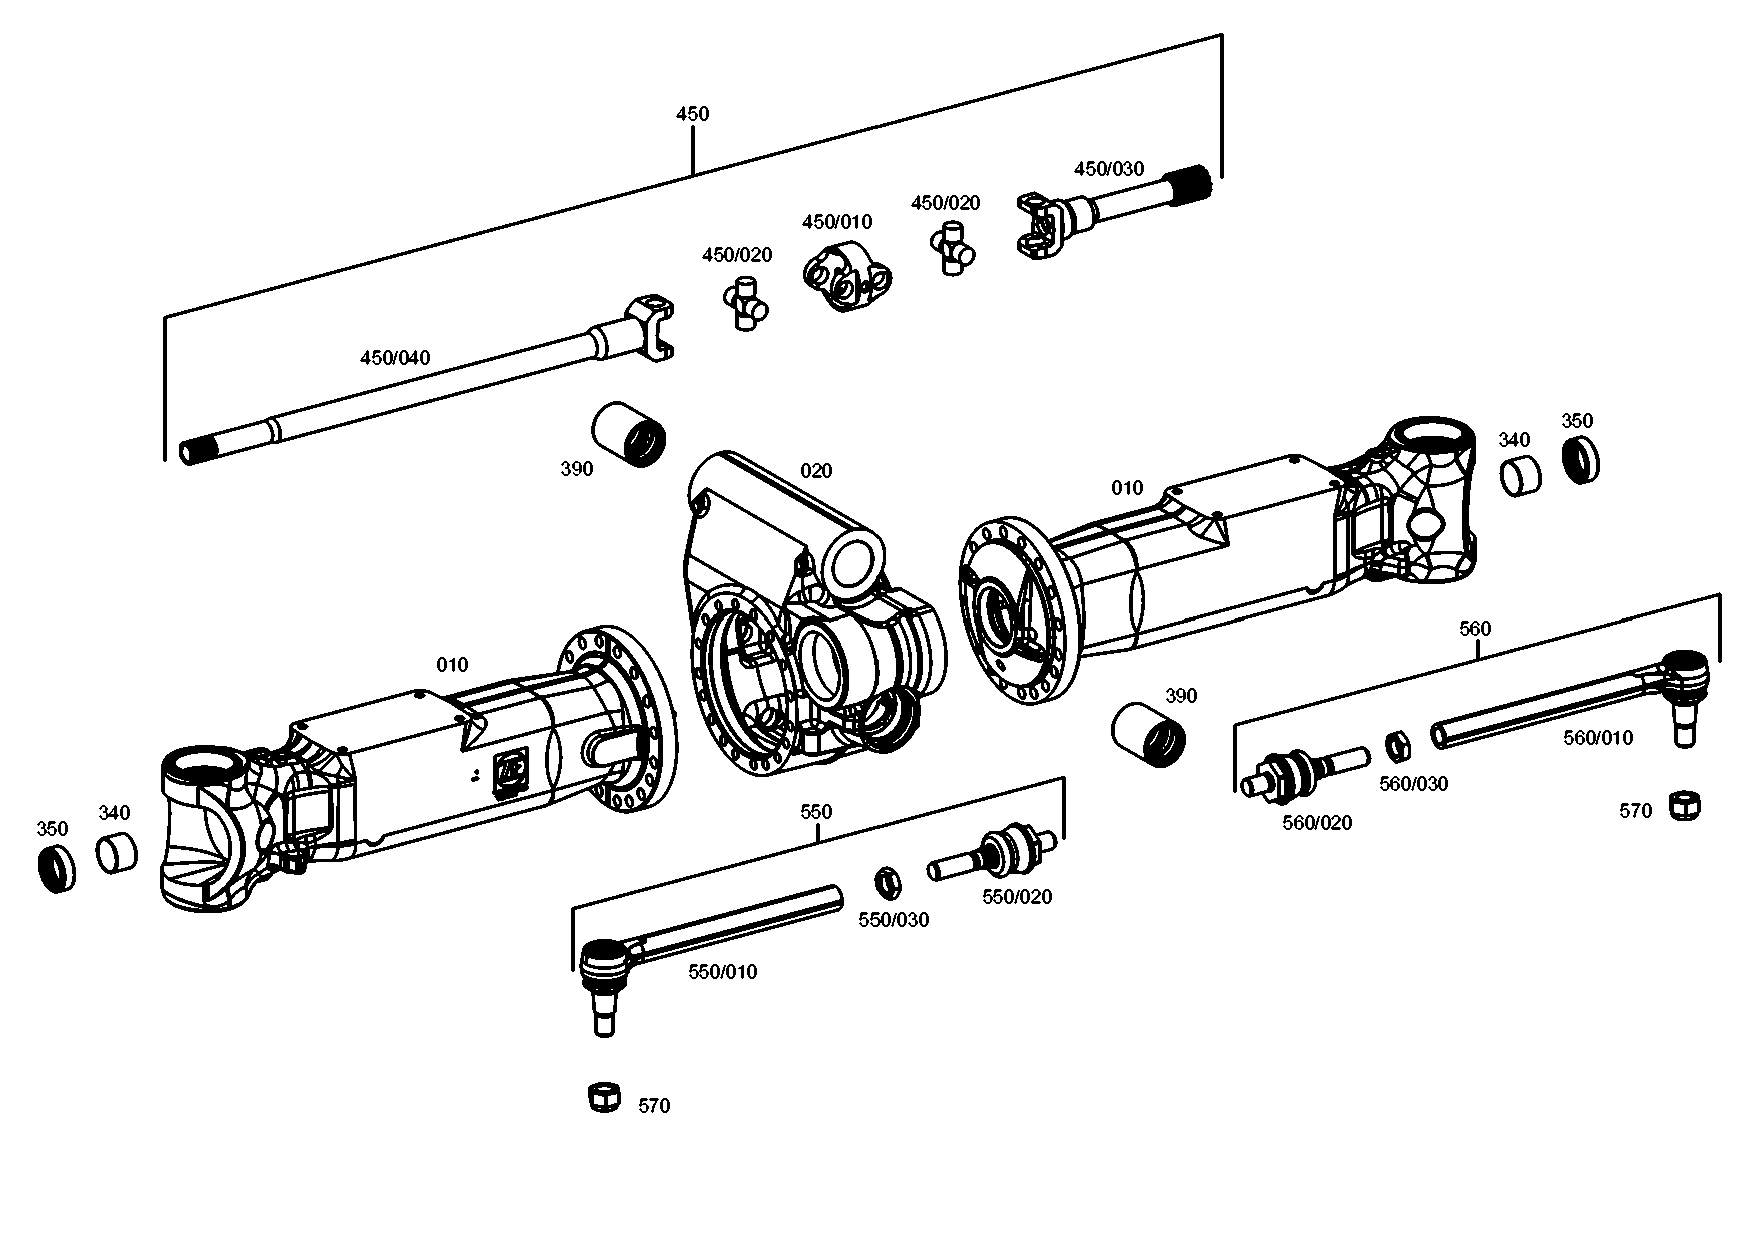 drawing for SENNEBOGEN HYDRAULIKBAGGER GMBH 146896 - AXIAL JOINT (figure 5)